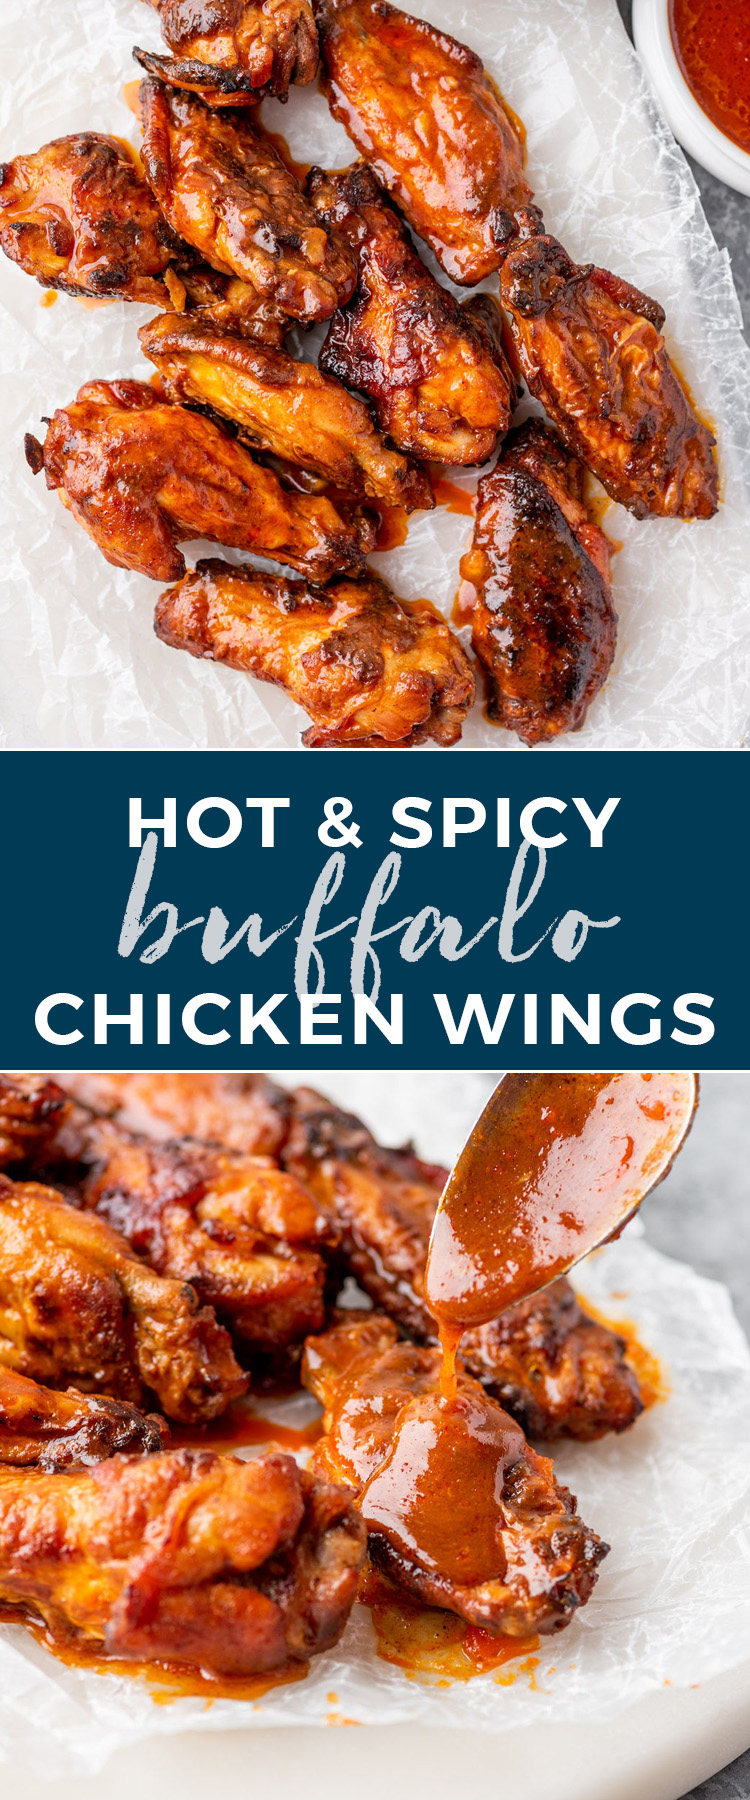 Hot & Spicy Baked Buffalo Chicken Wings | Gimme Delicious